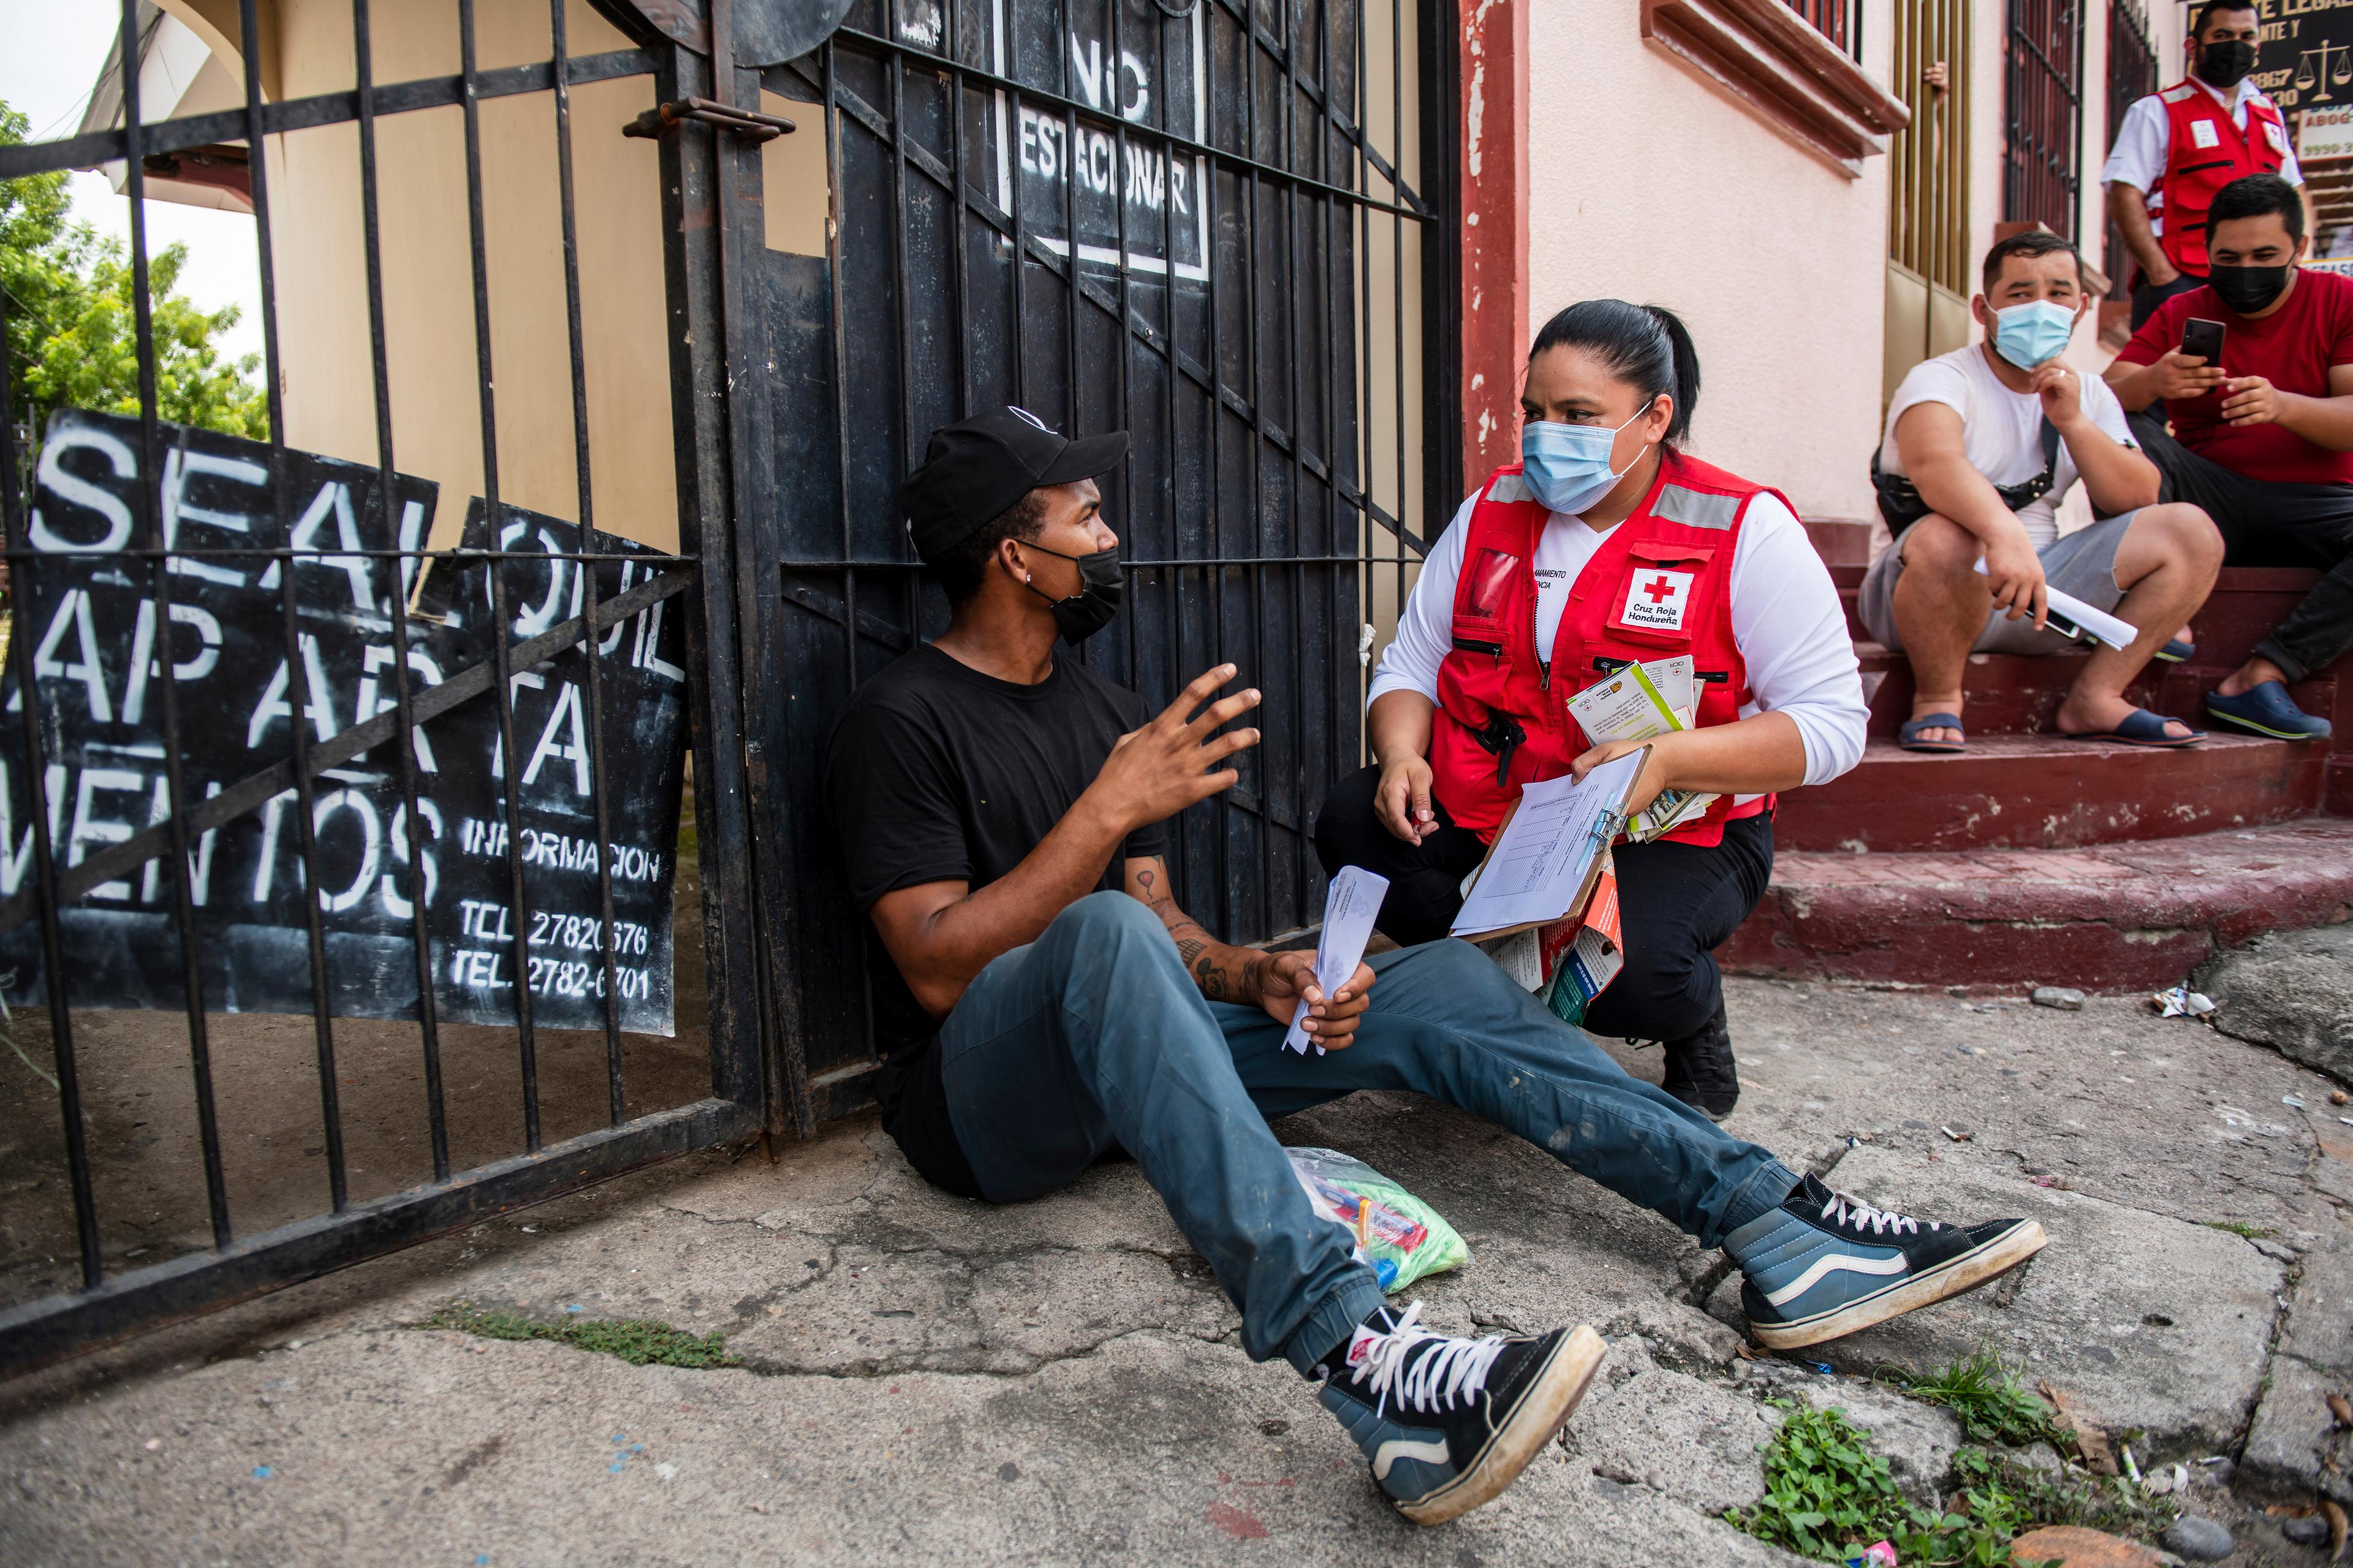 A woman is wearing a red vest and a hygiene mask. She kneels next to a man sitting on the floor and talks to him. In her hand she holds documents. They are in front of a gate. More men are sitting in the background. 